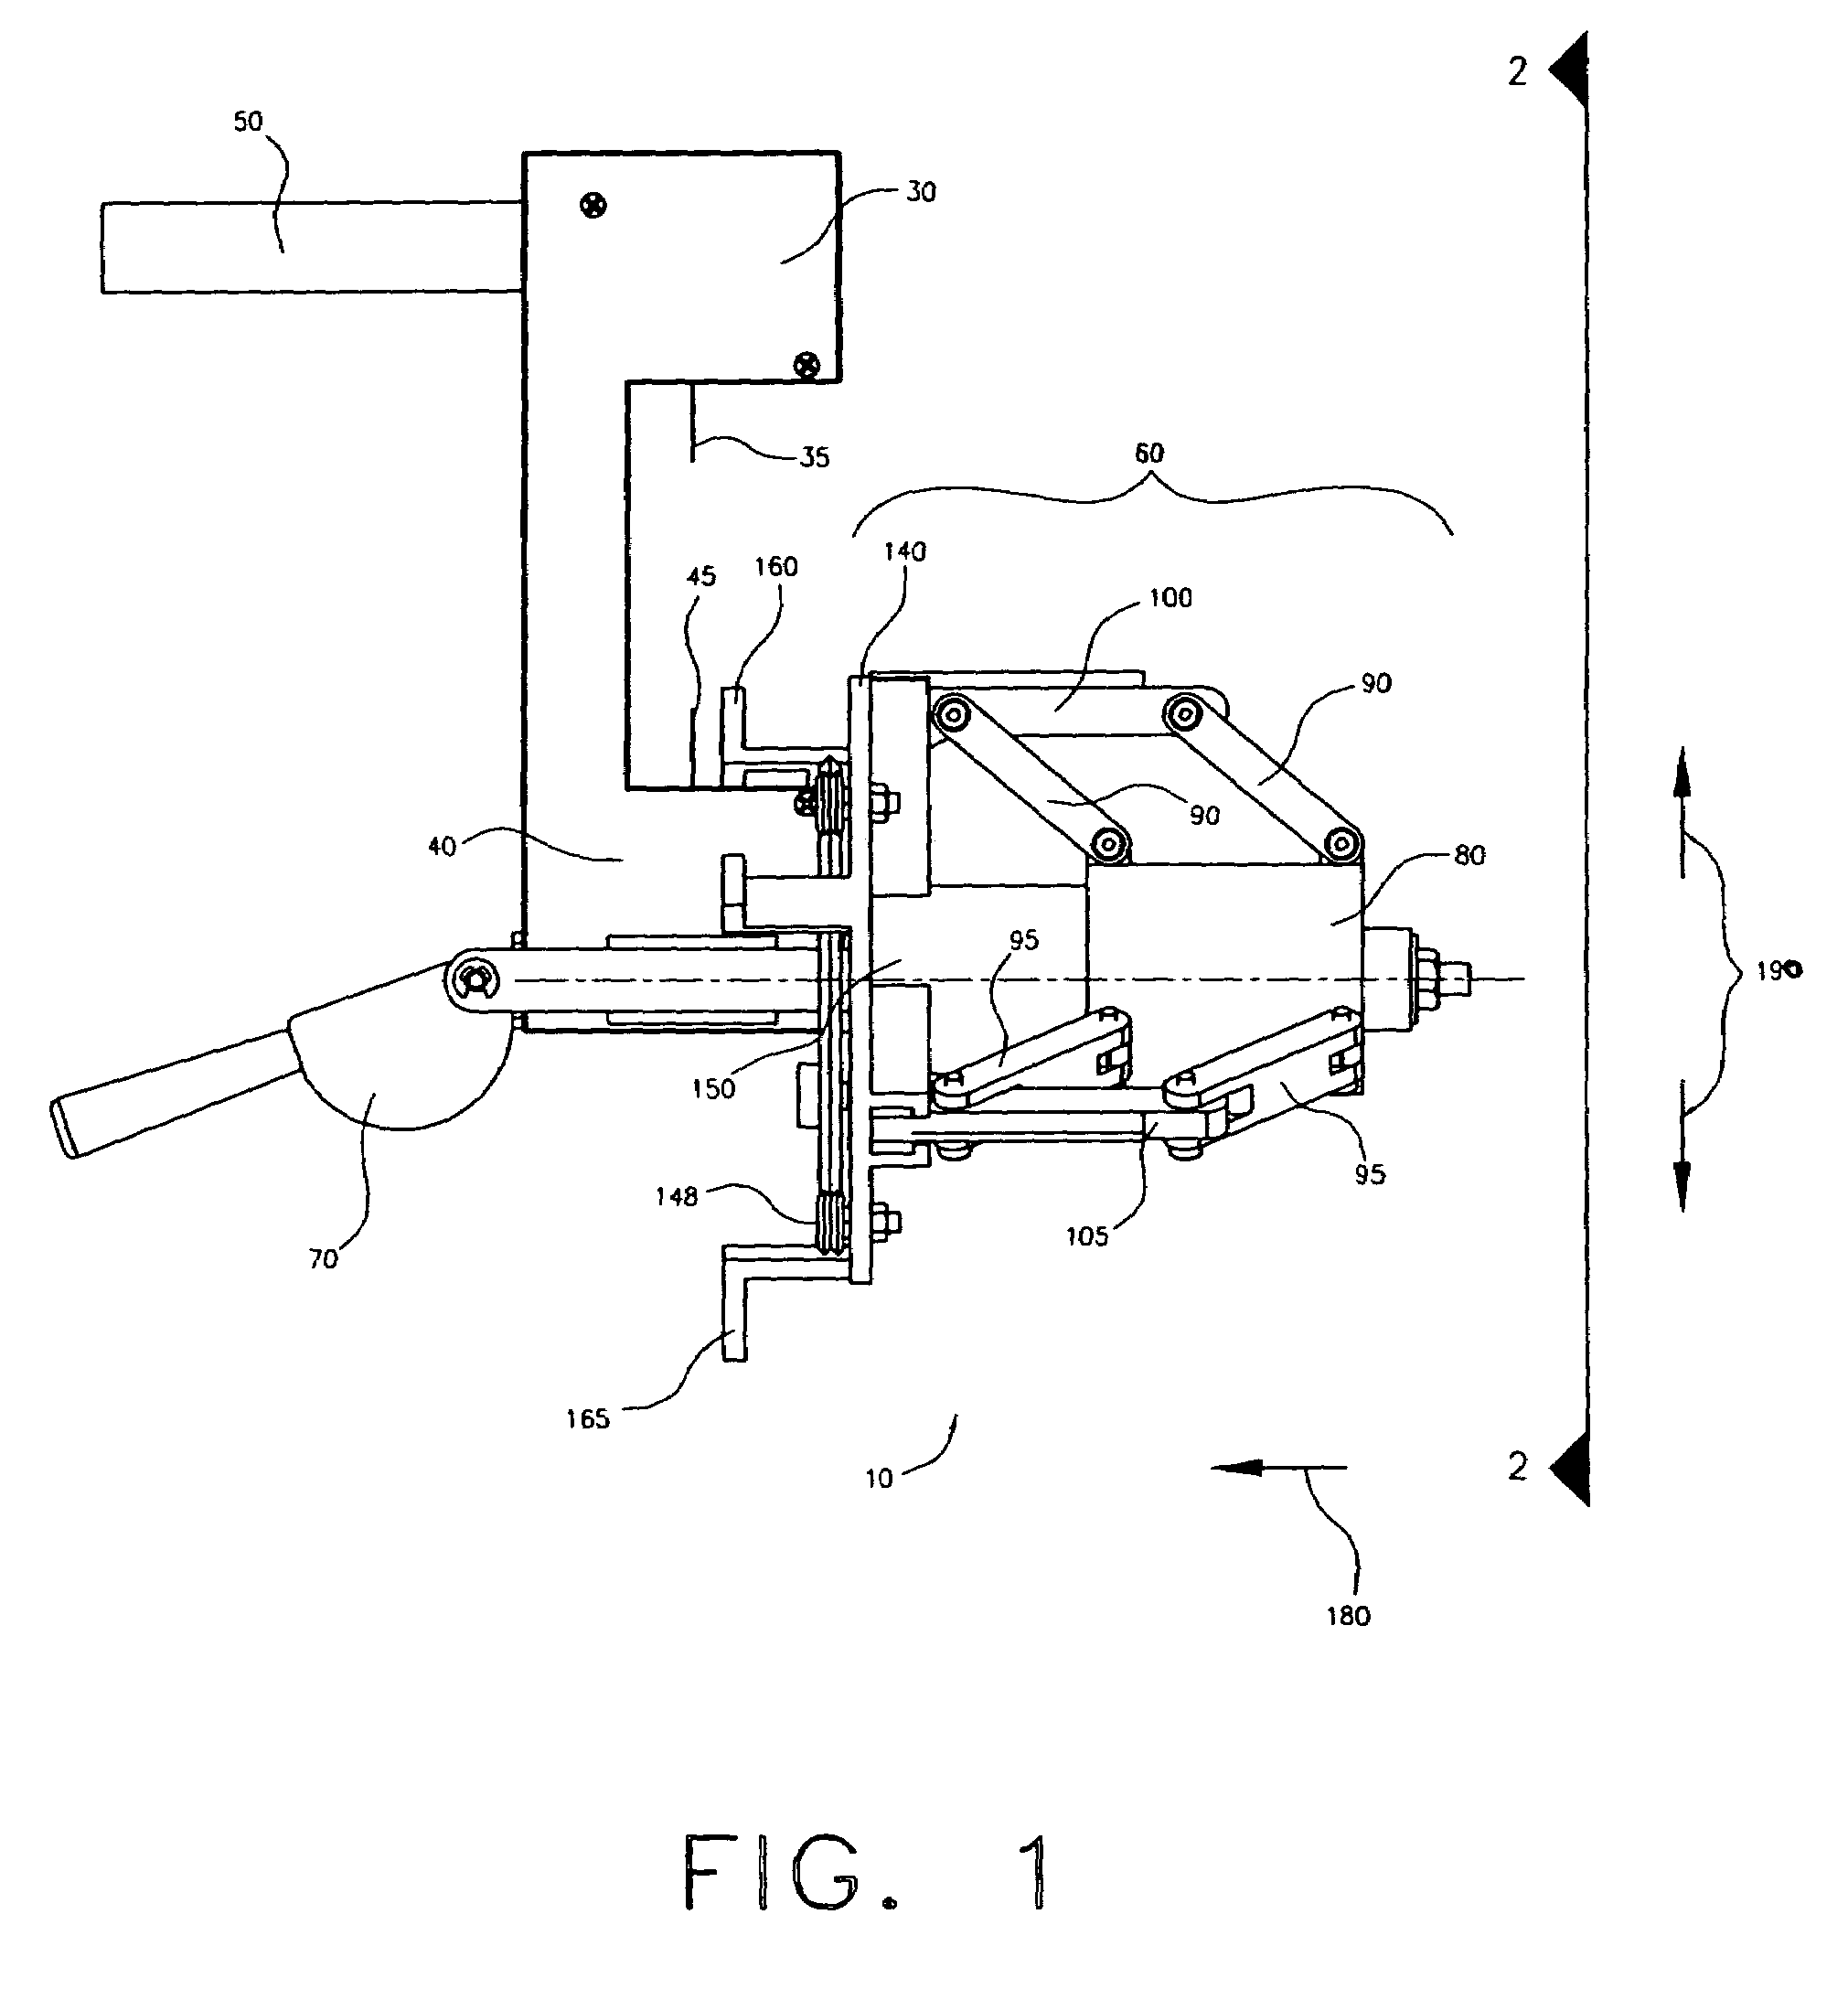 Method and apparatus for best fitting two or more items